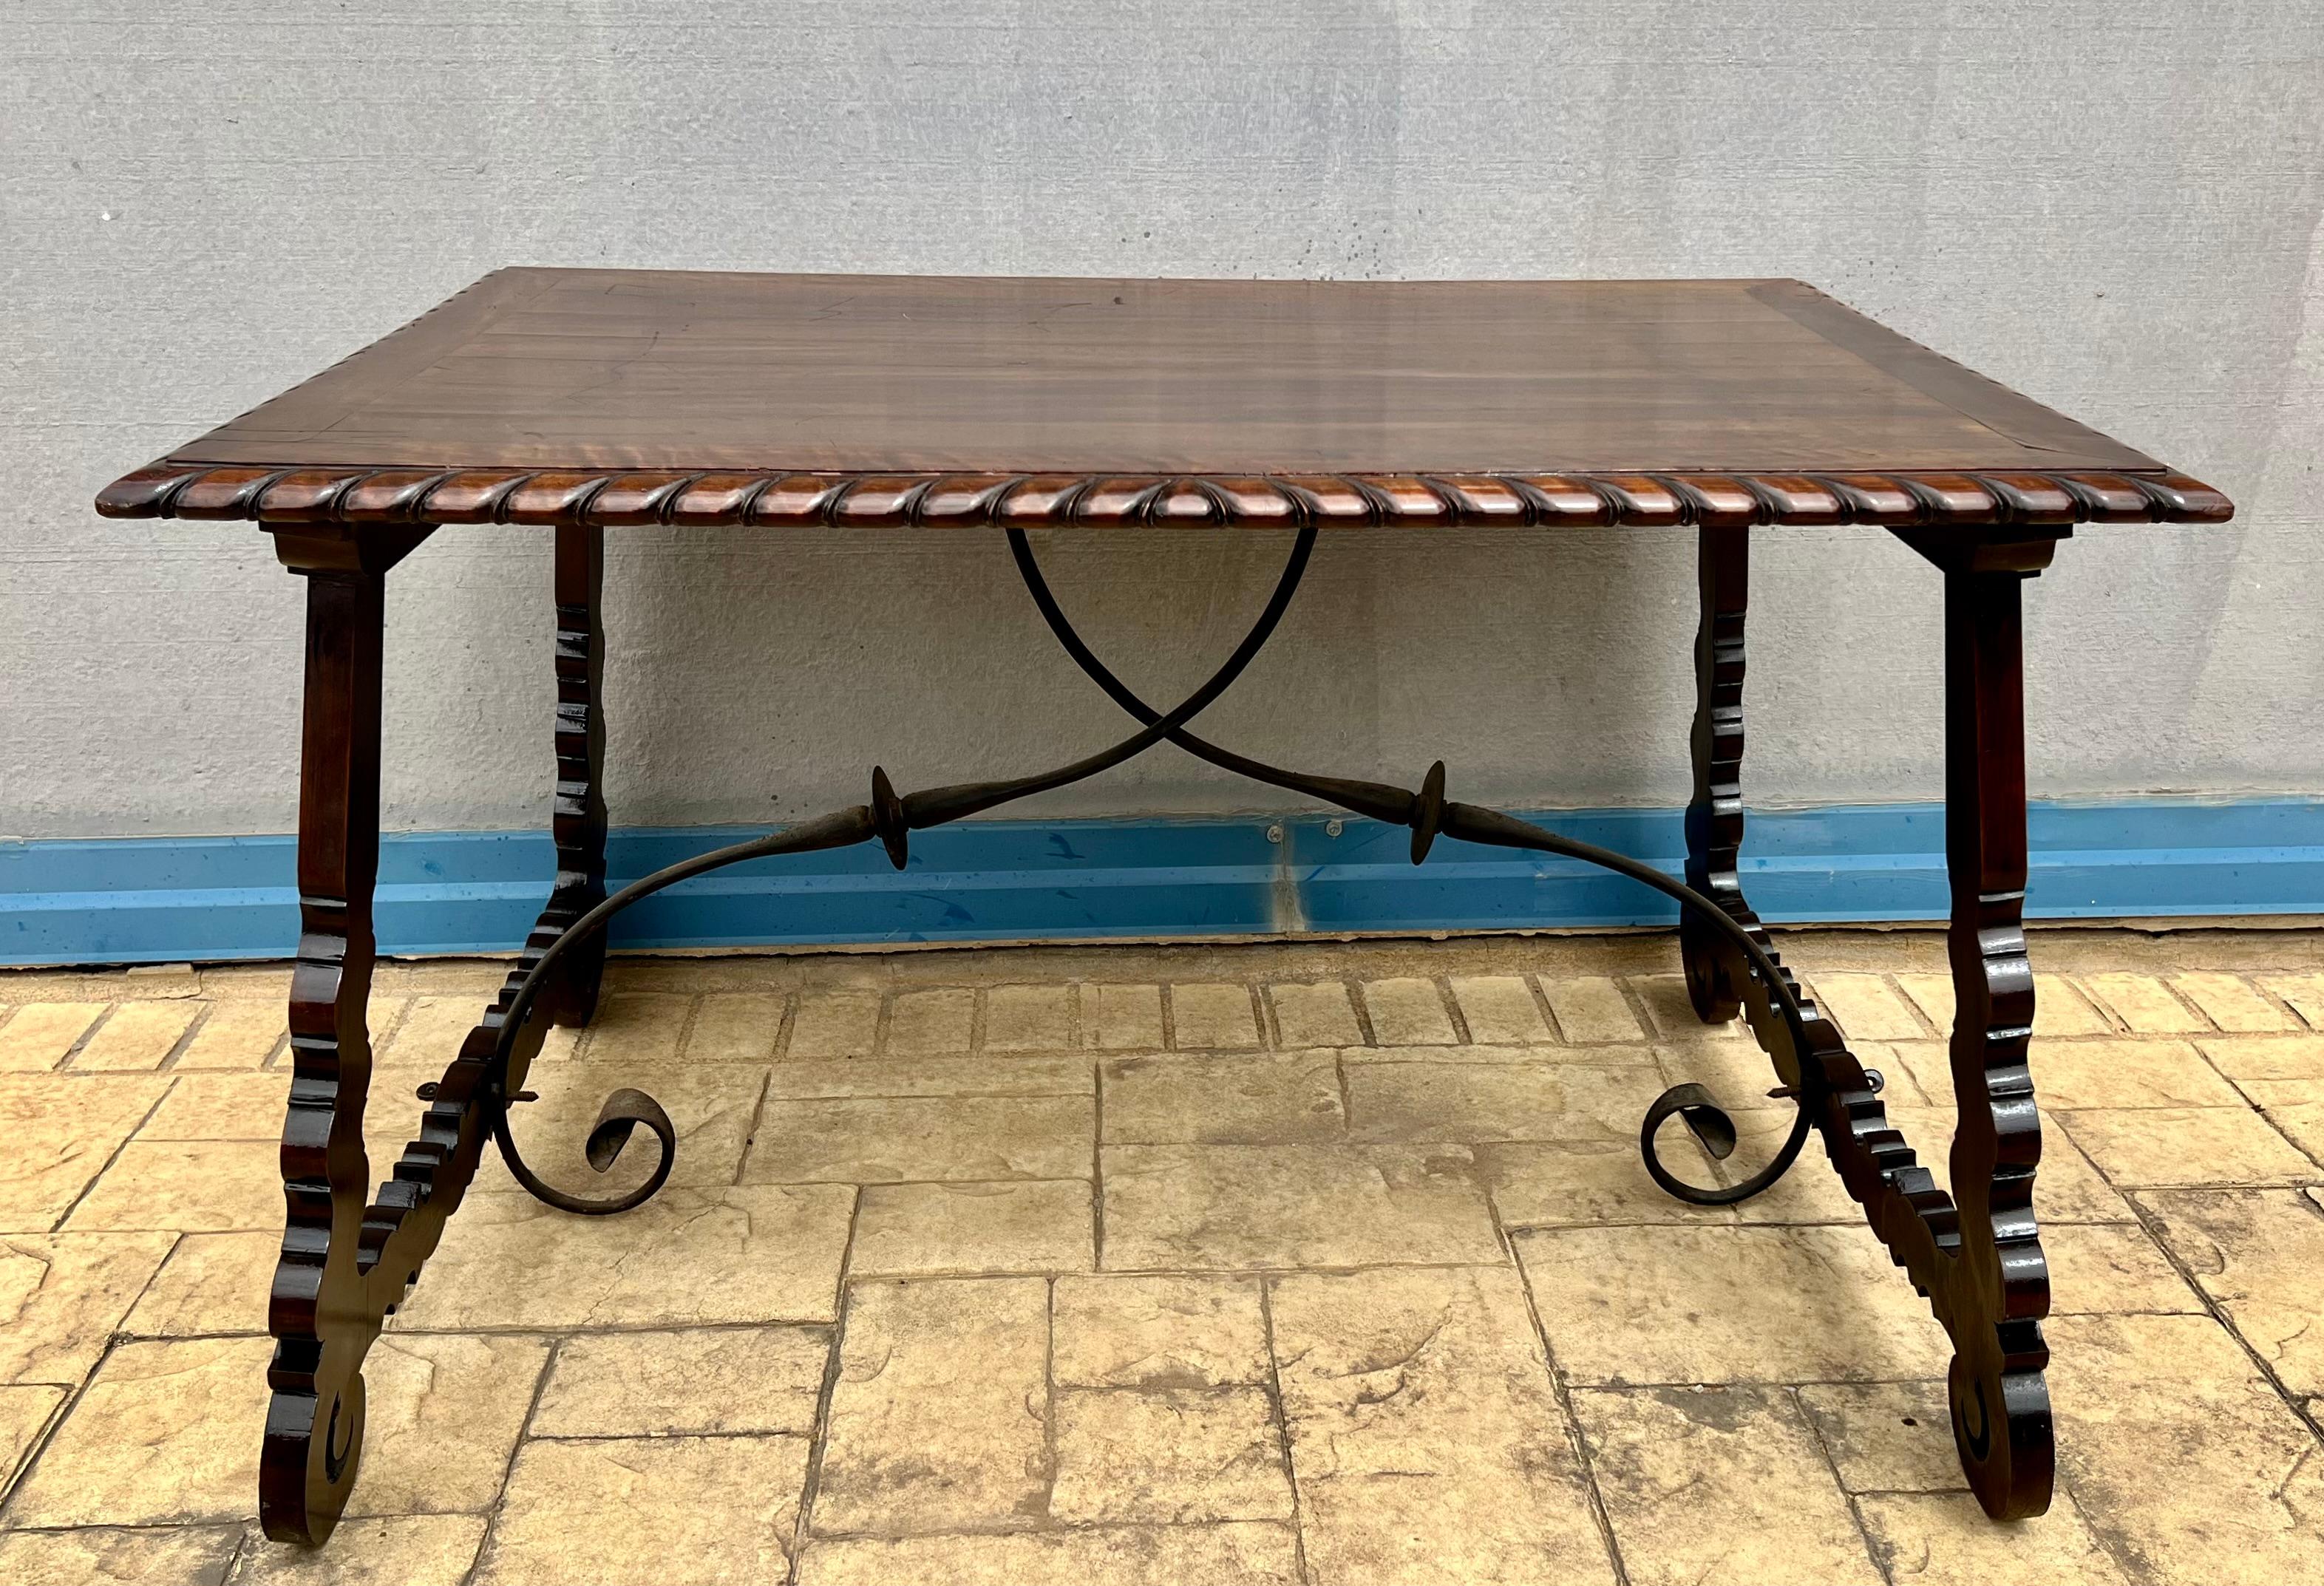 18th century Catalonian dining table with Baroque style lyre legs.

This Spanish 18th century table features a rectangular top over an exquisite trestle type base with lyre shaped legs raised on carved volutes. Big thickness of the plateau and